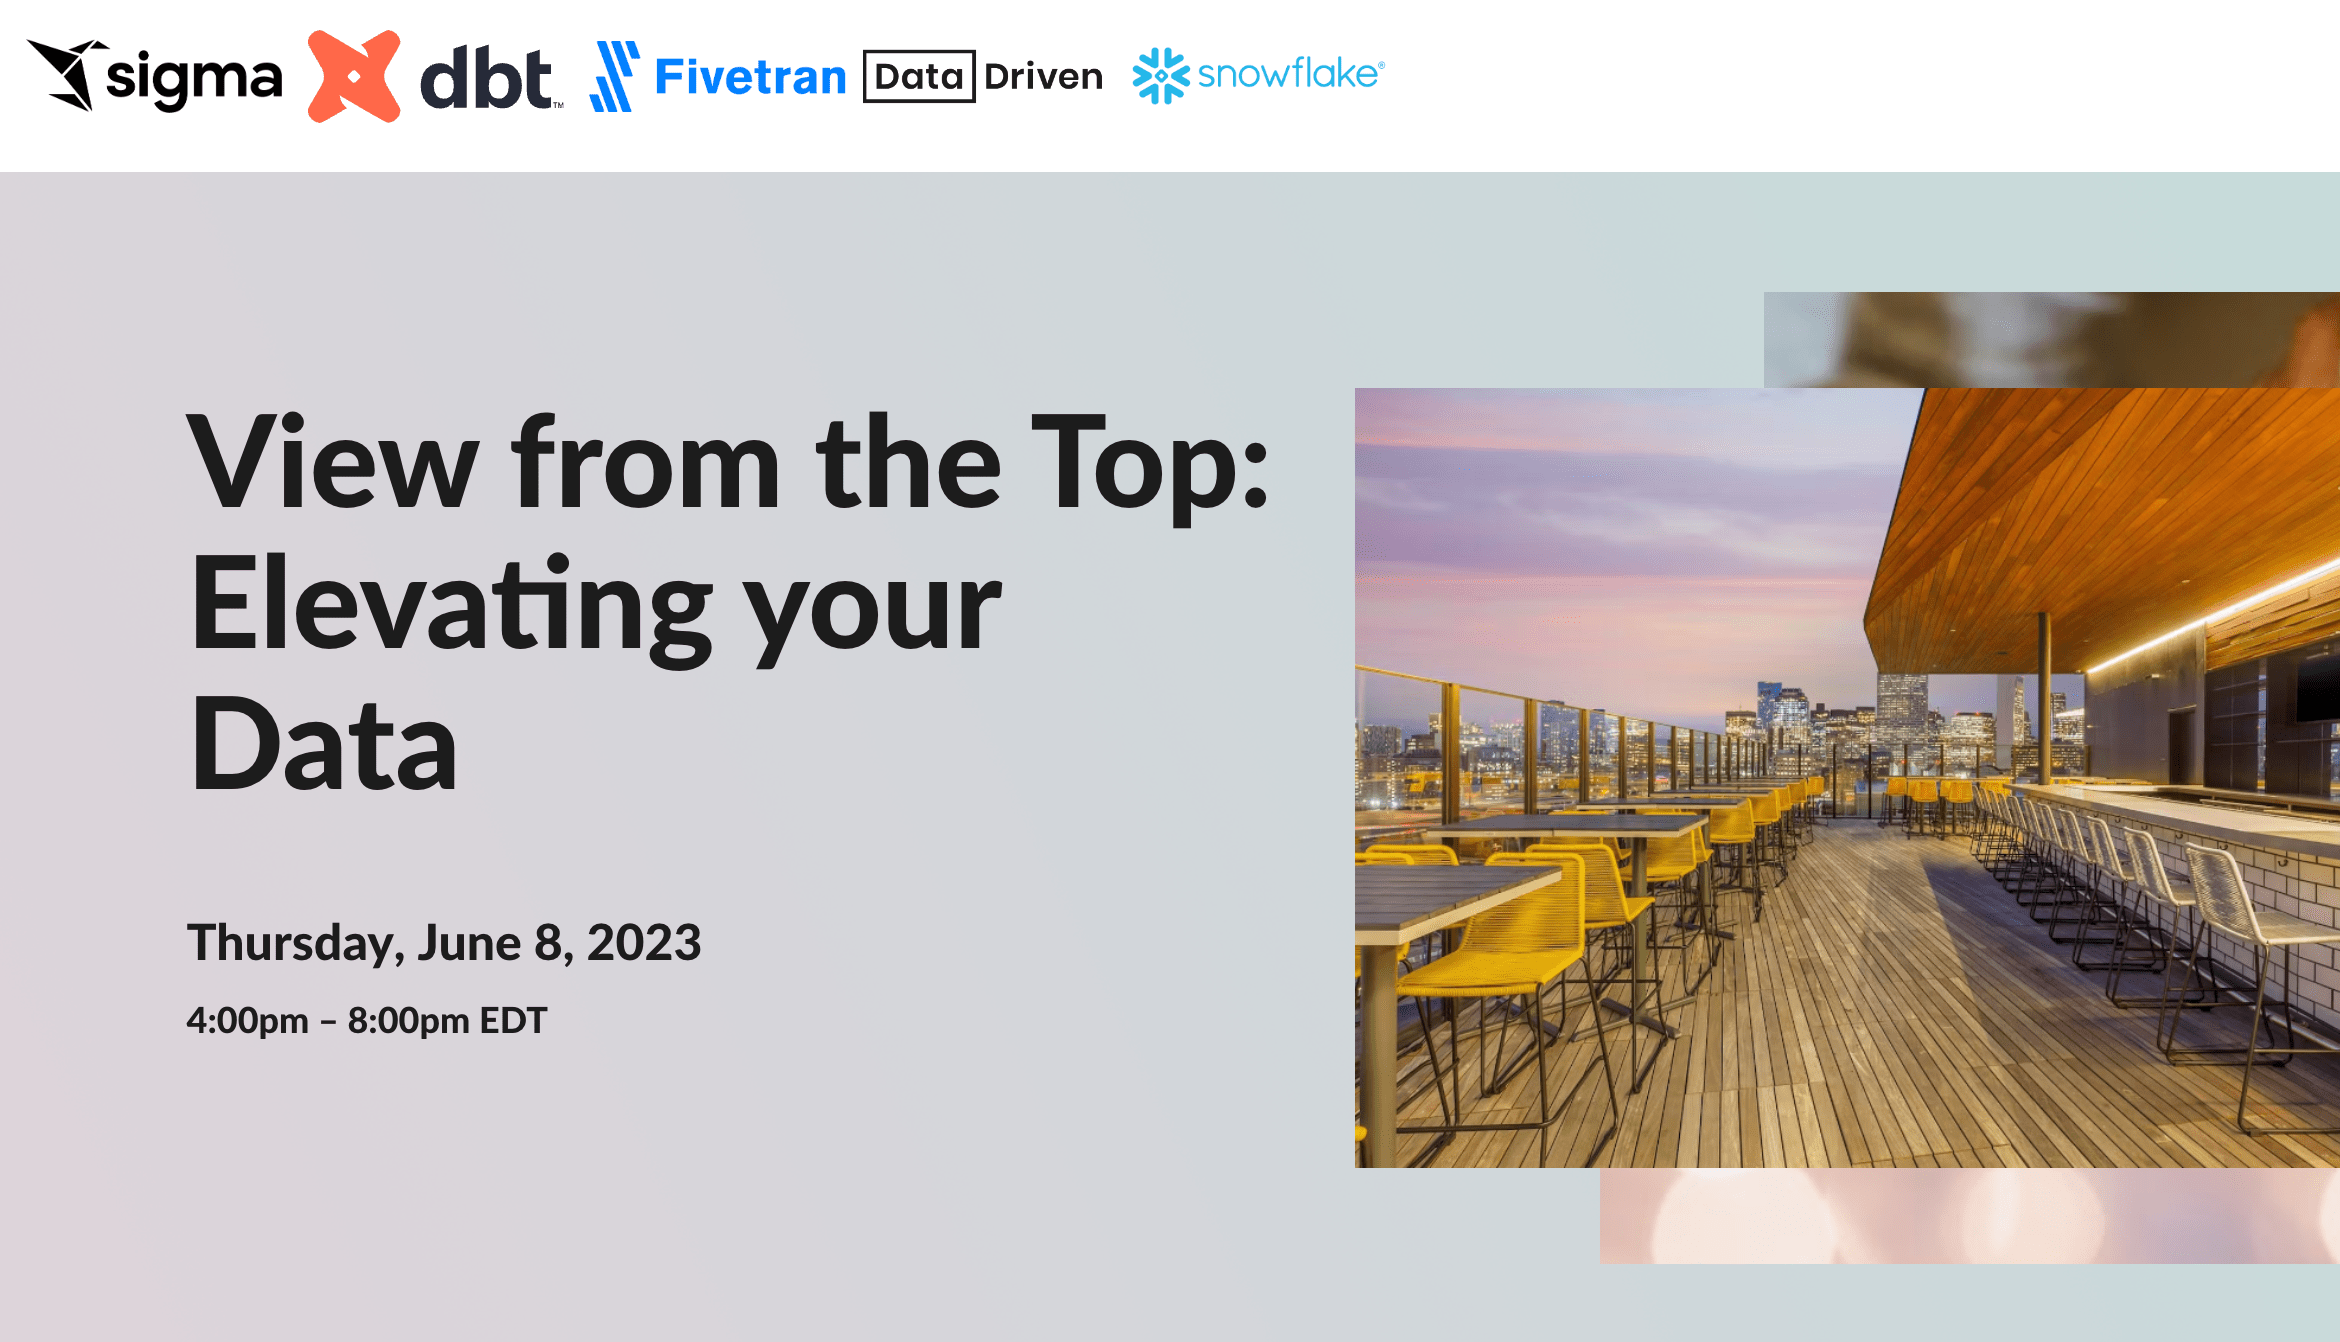 View from the Top: Elevating your data